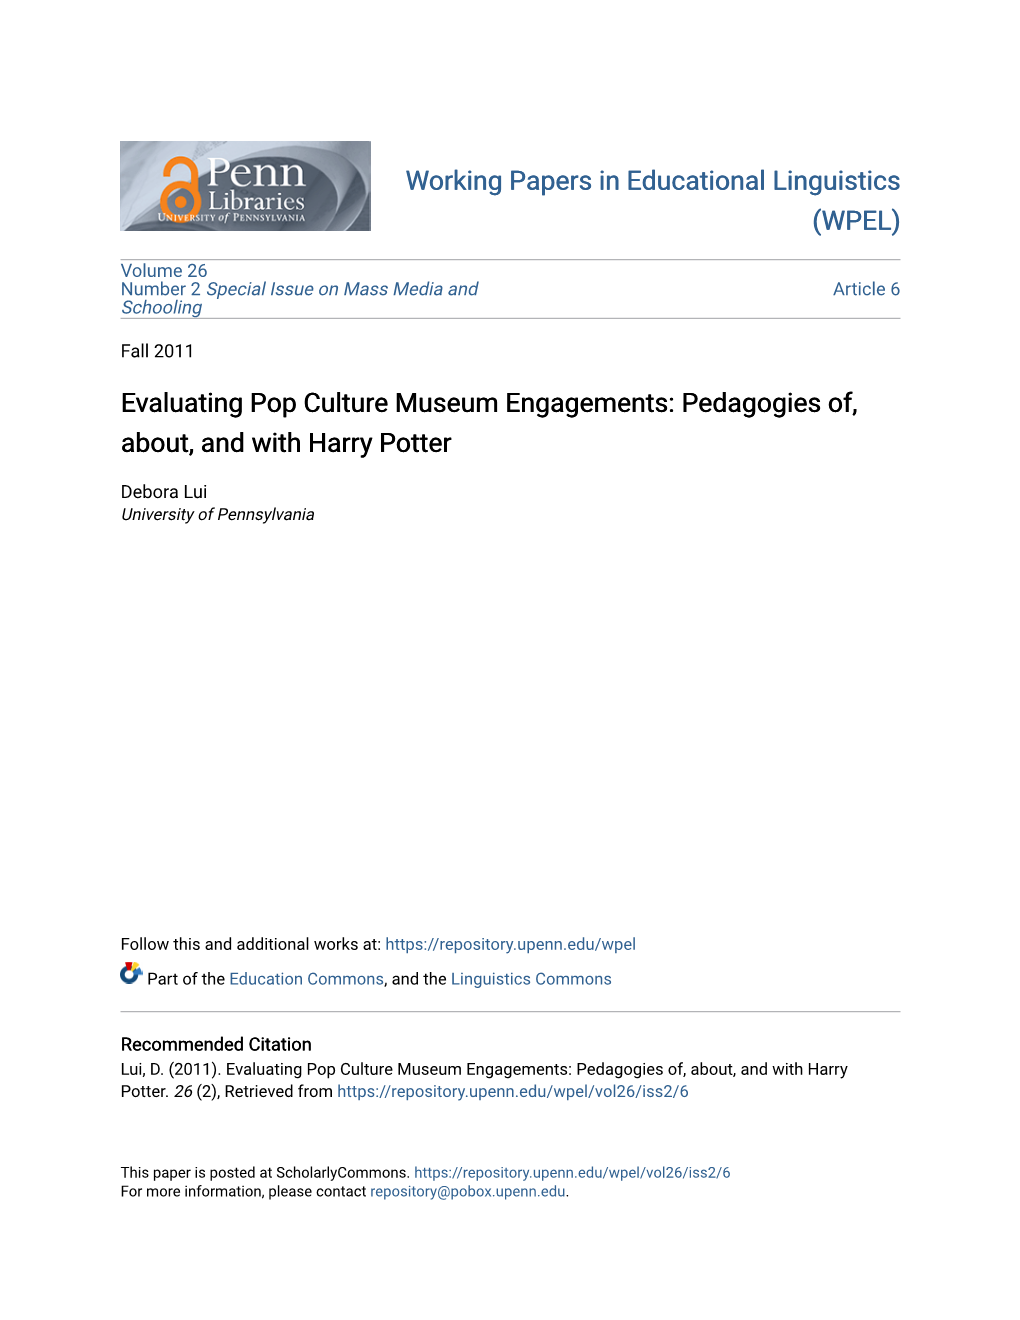 Evaluating Pop Culture Museum Engagements: Pedagogies Of, About, and with Harry Potter